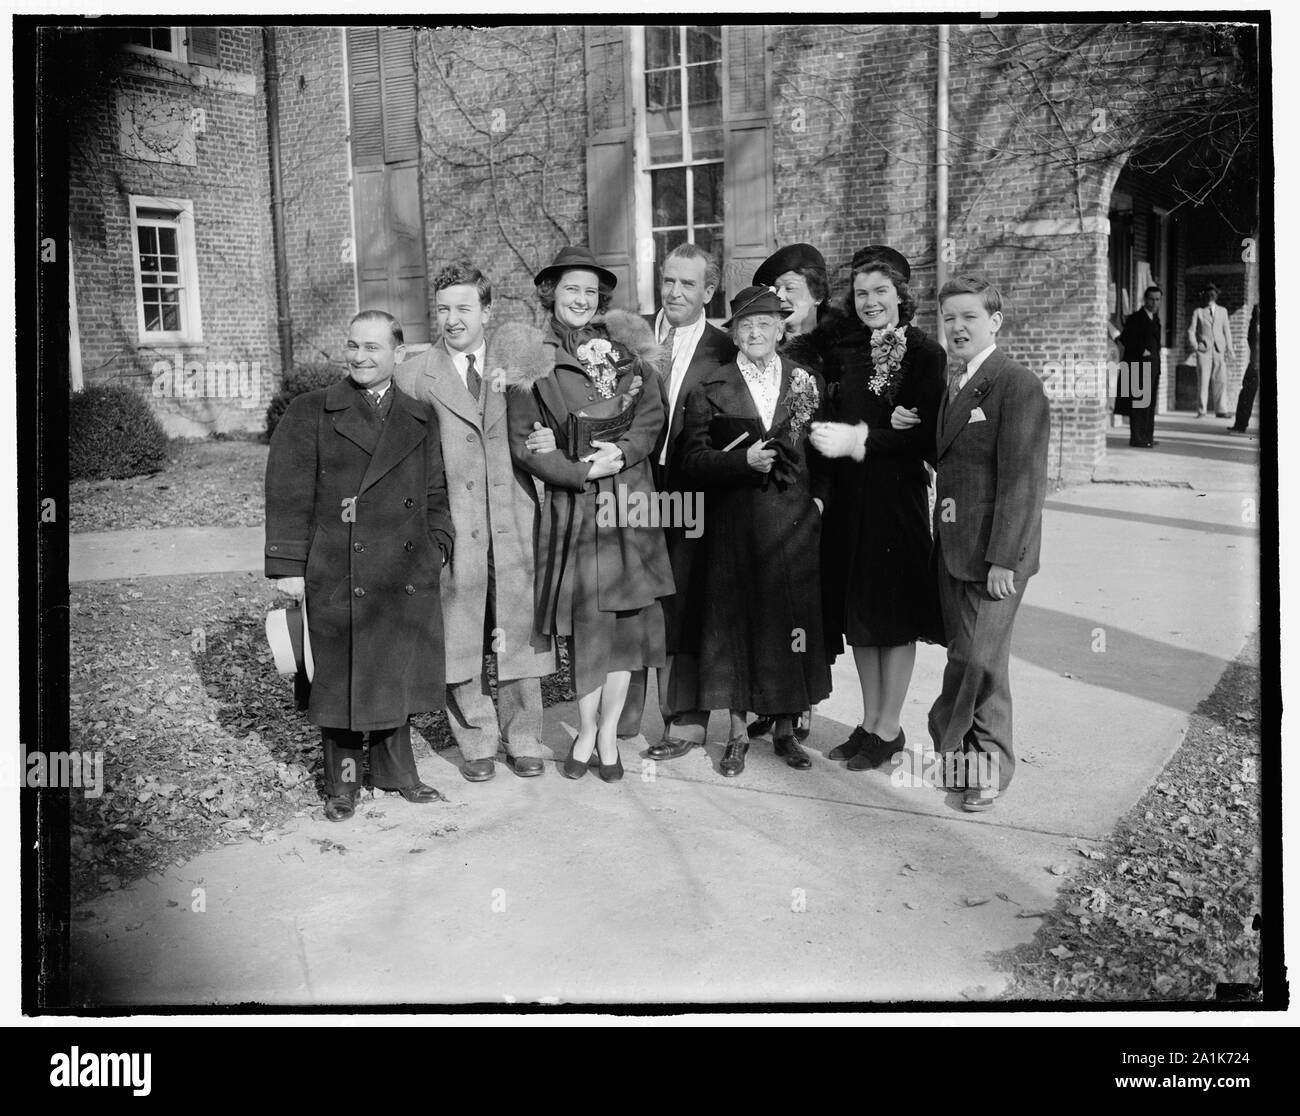 New Jersey senator weds in Virginia. Fairfax Courthouse, Va. Feb. 9. United States Senator William H. Smathers of New Jersey, with his bride the former Mary James Foley of Berryville, Va., are shown with a group of relatives and friends who witnessed the ceremony today in the historic courthouse here. In the photograph, left to right: Fred Yale of New Jersey; Joseph B. Smathers, son of the Senator by a previous marriage; Mrs. Smathers, the bride; Senator Smathers; Mrs. B.F. Smathers, the Senator's Mother; Mrs. William Abbott Coleman of Arlington, Va., Aunt of the Bride; Miss Billie Smathers, d Stock Photo